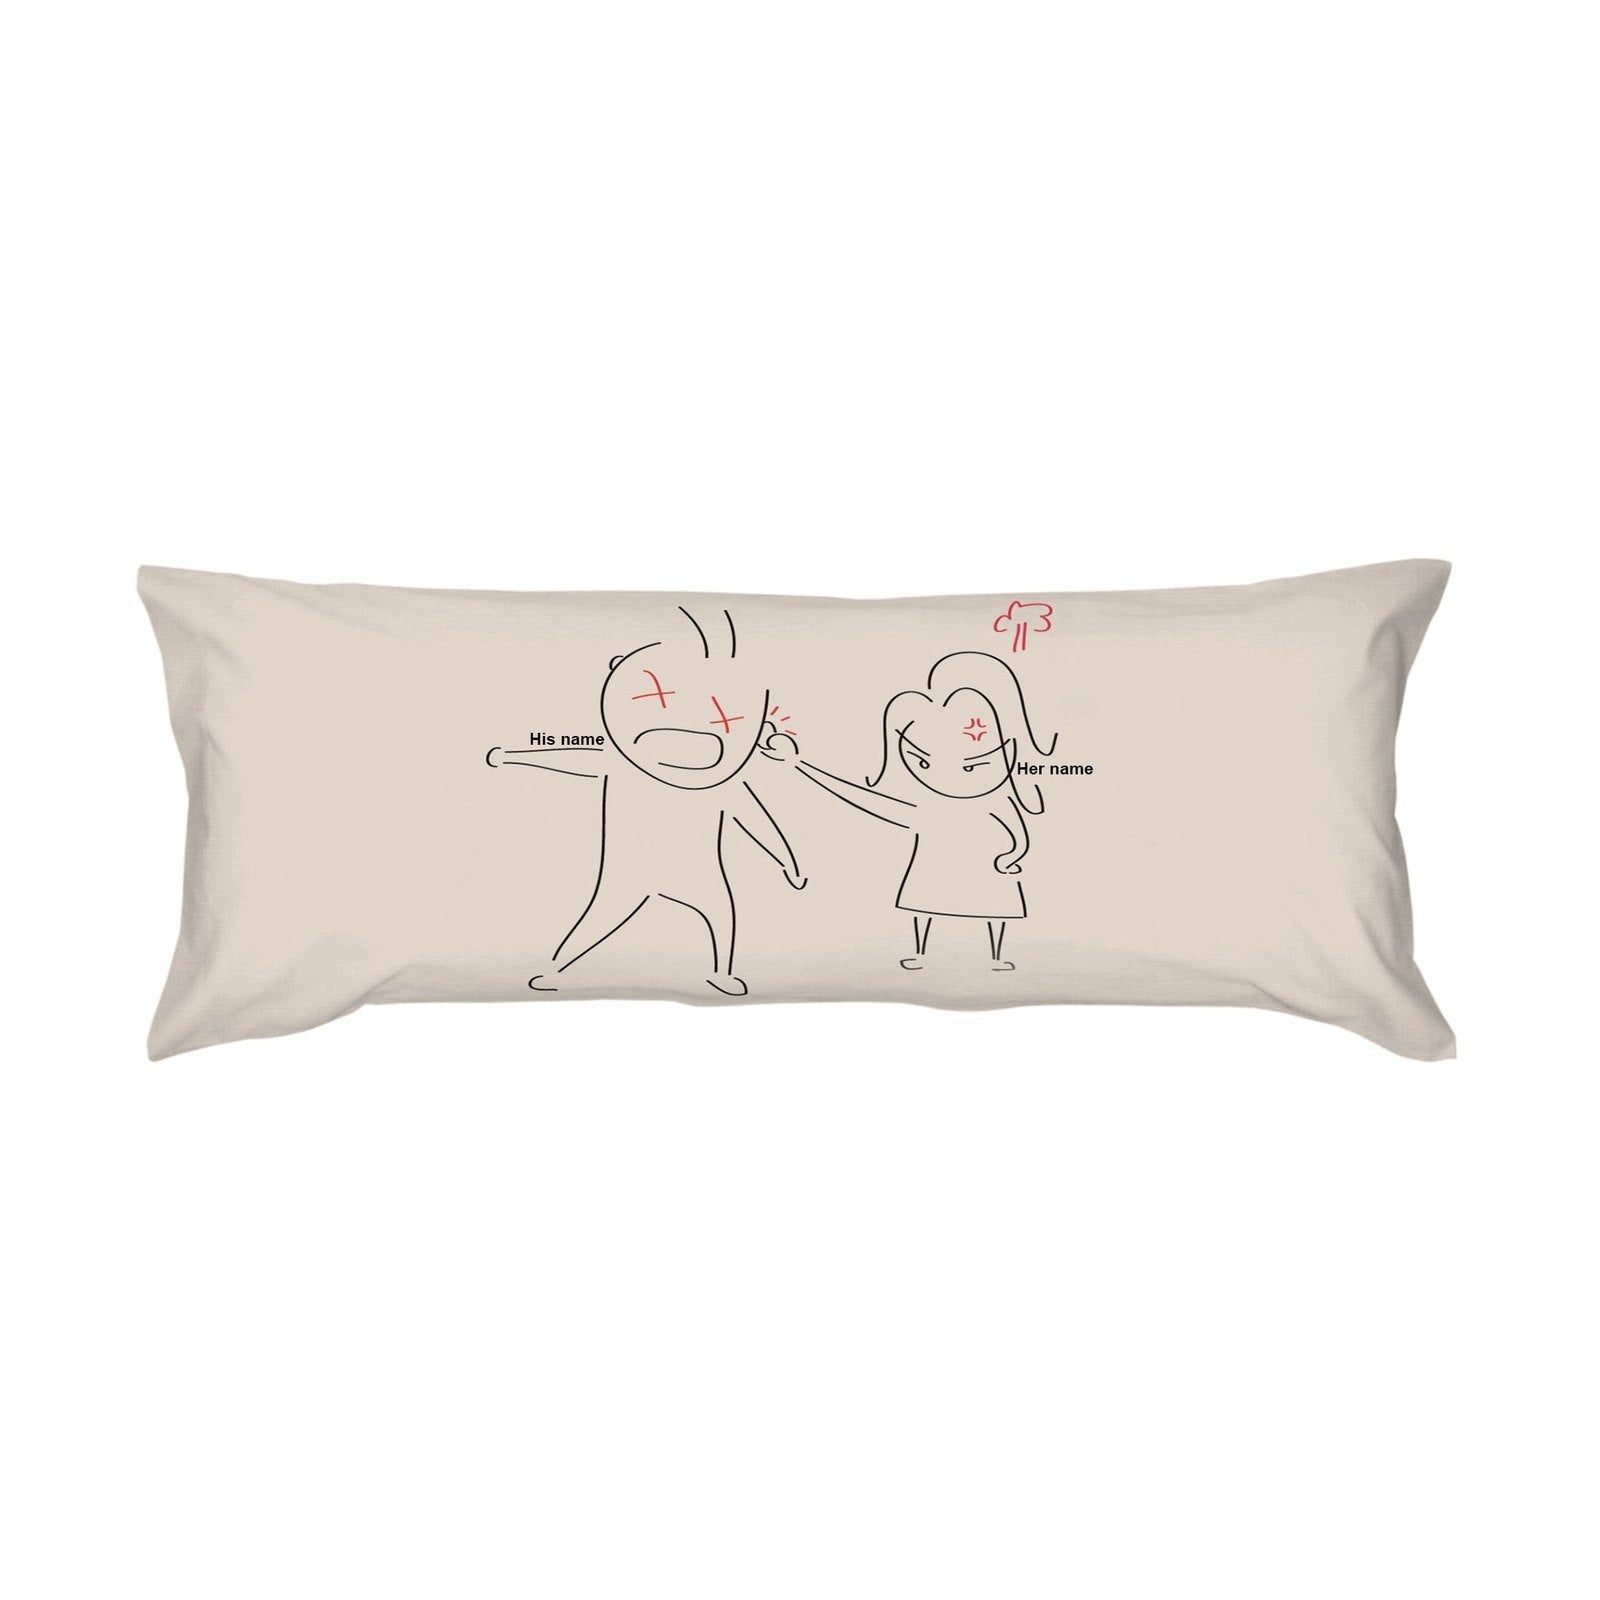 Oops! My bad - Hug pillowcaseHome & GardenHuman Touch Official
"I beg and accept all the blame on no condition. Do what you think you should as you wish" Let this Human Touch design help you said sorry for your darling. No need